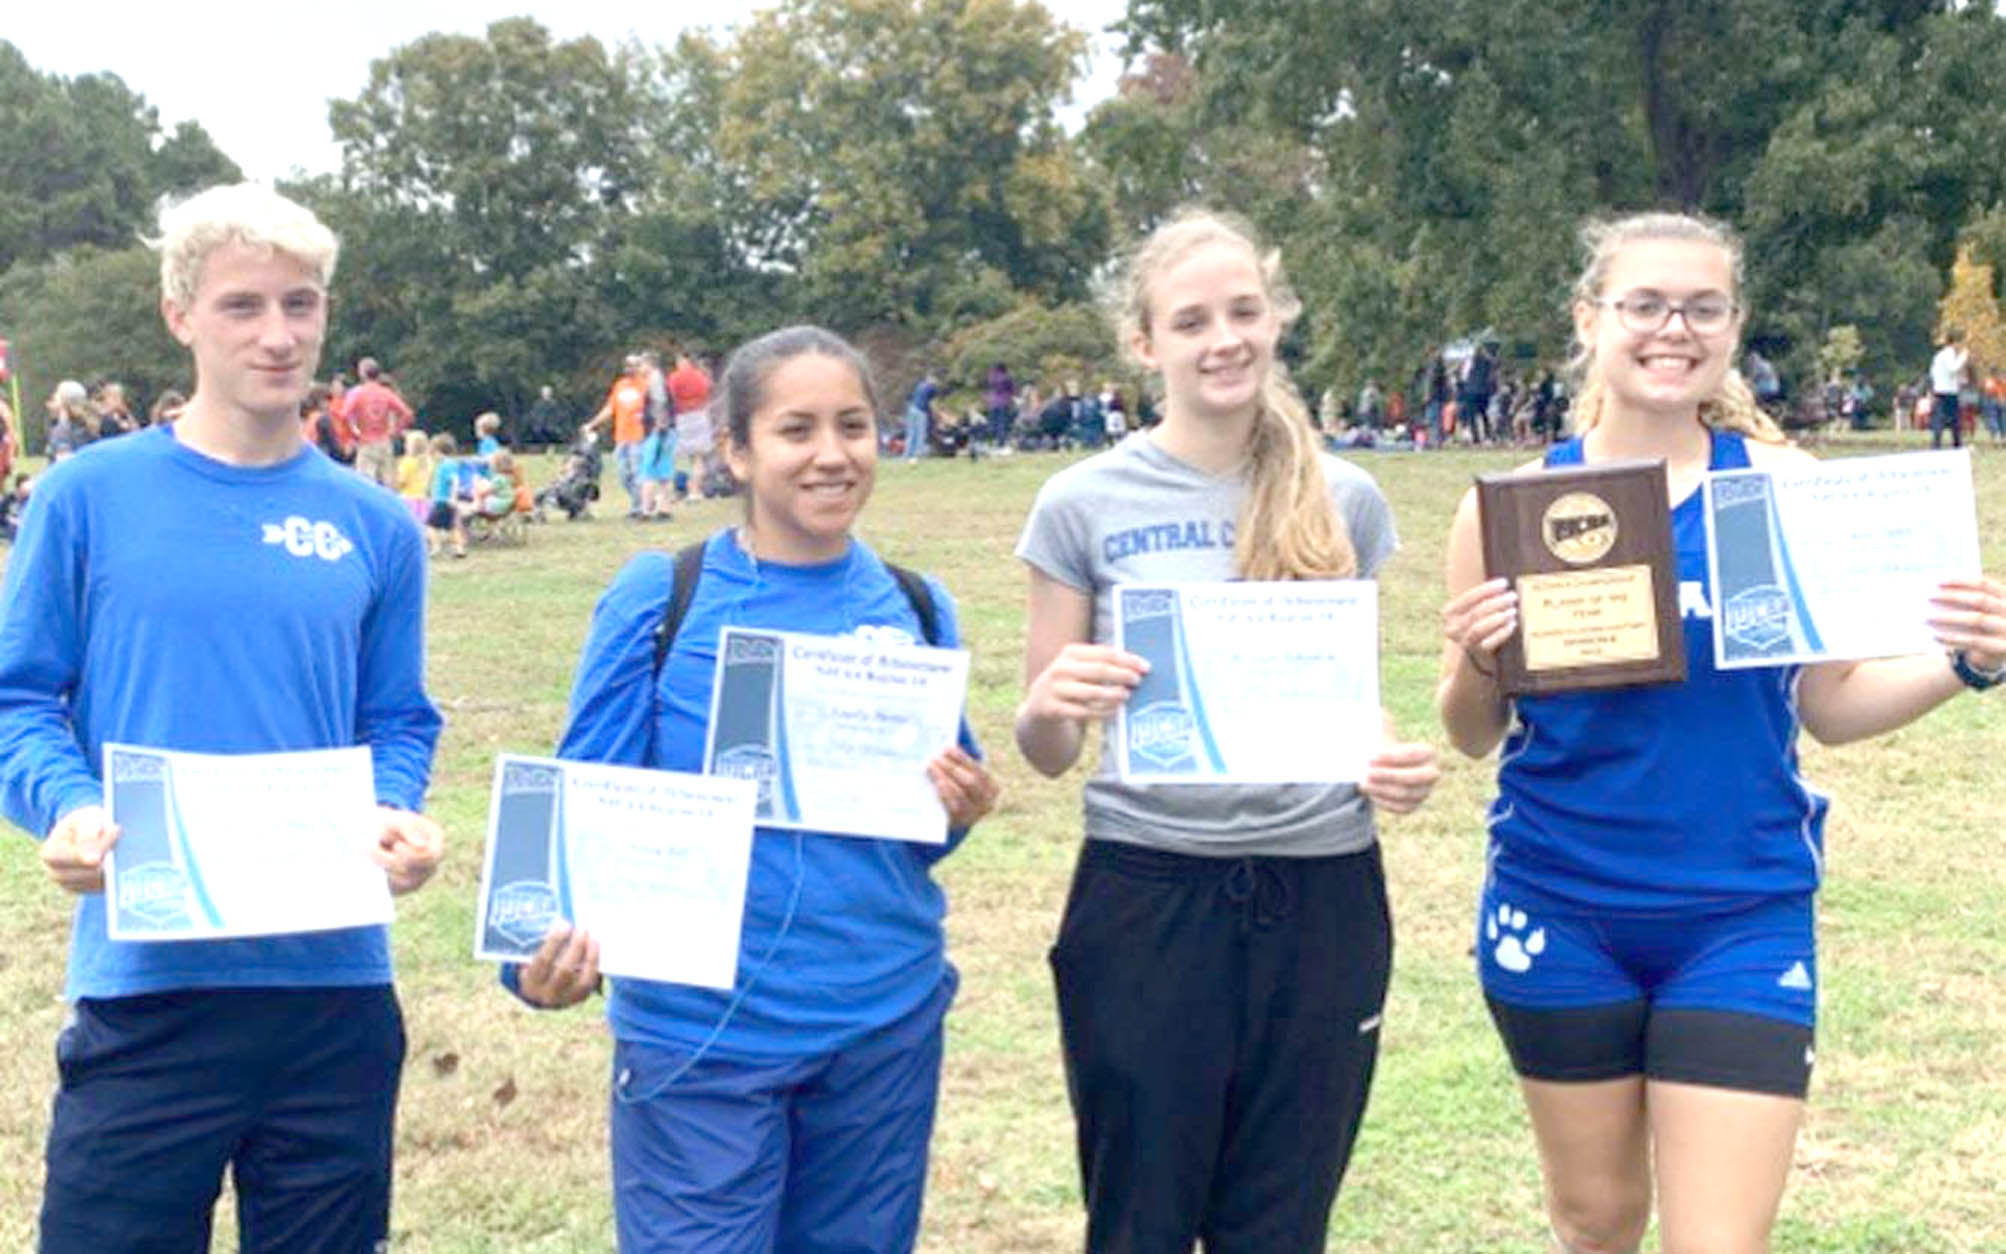 Click to enlarge,  The Central Carolina Community College cross country team recently competed at the National Junior College Athletic Association (NJCAA) Region X Cross Country Championships in Spartanburg, S.C. In the women's competition, Anna Trotter (far right) of Pittsboro, N.C., won first place for Division 3 and was named Runner of the Year. Nayelly Martinez (second from left) of Sanford, N.C., finished third and Marilynn Richardson (second from right) of Sanford, N.C., finished fourth among Division 3 runners. All three were named to the All-Region team. In the men's competition, Colby Day (far left) of Frisco, N.C., led the Cougars, finishing fourth among Division 3 runners. He was also named to the All-Region team. The men's team placed second overall in Division 3. Trotter and Day will advance to the NJCAA Division 3 Men's and Women's Cross Country Championships on Saturday at Stanley Park in Westfield, Mass. 